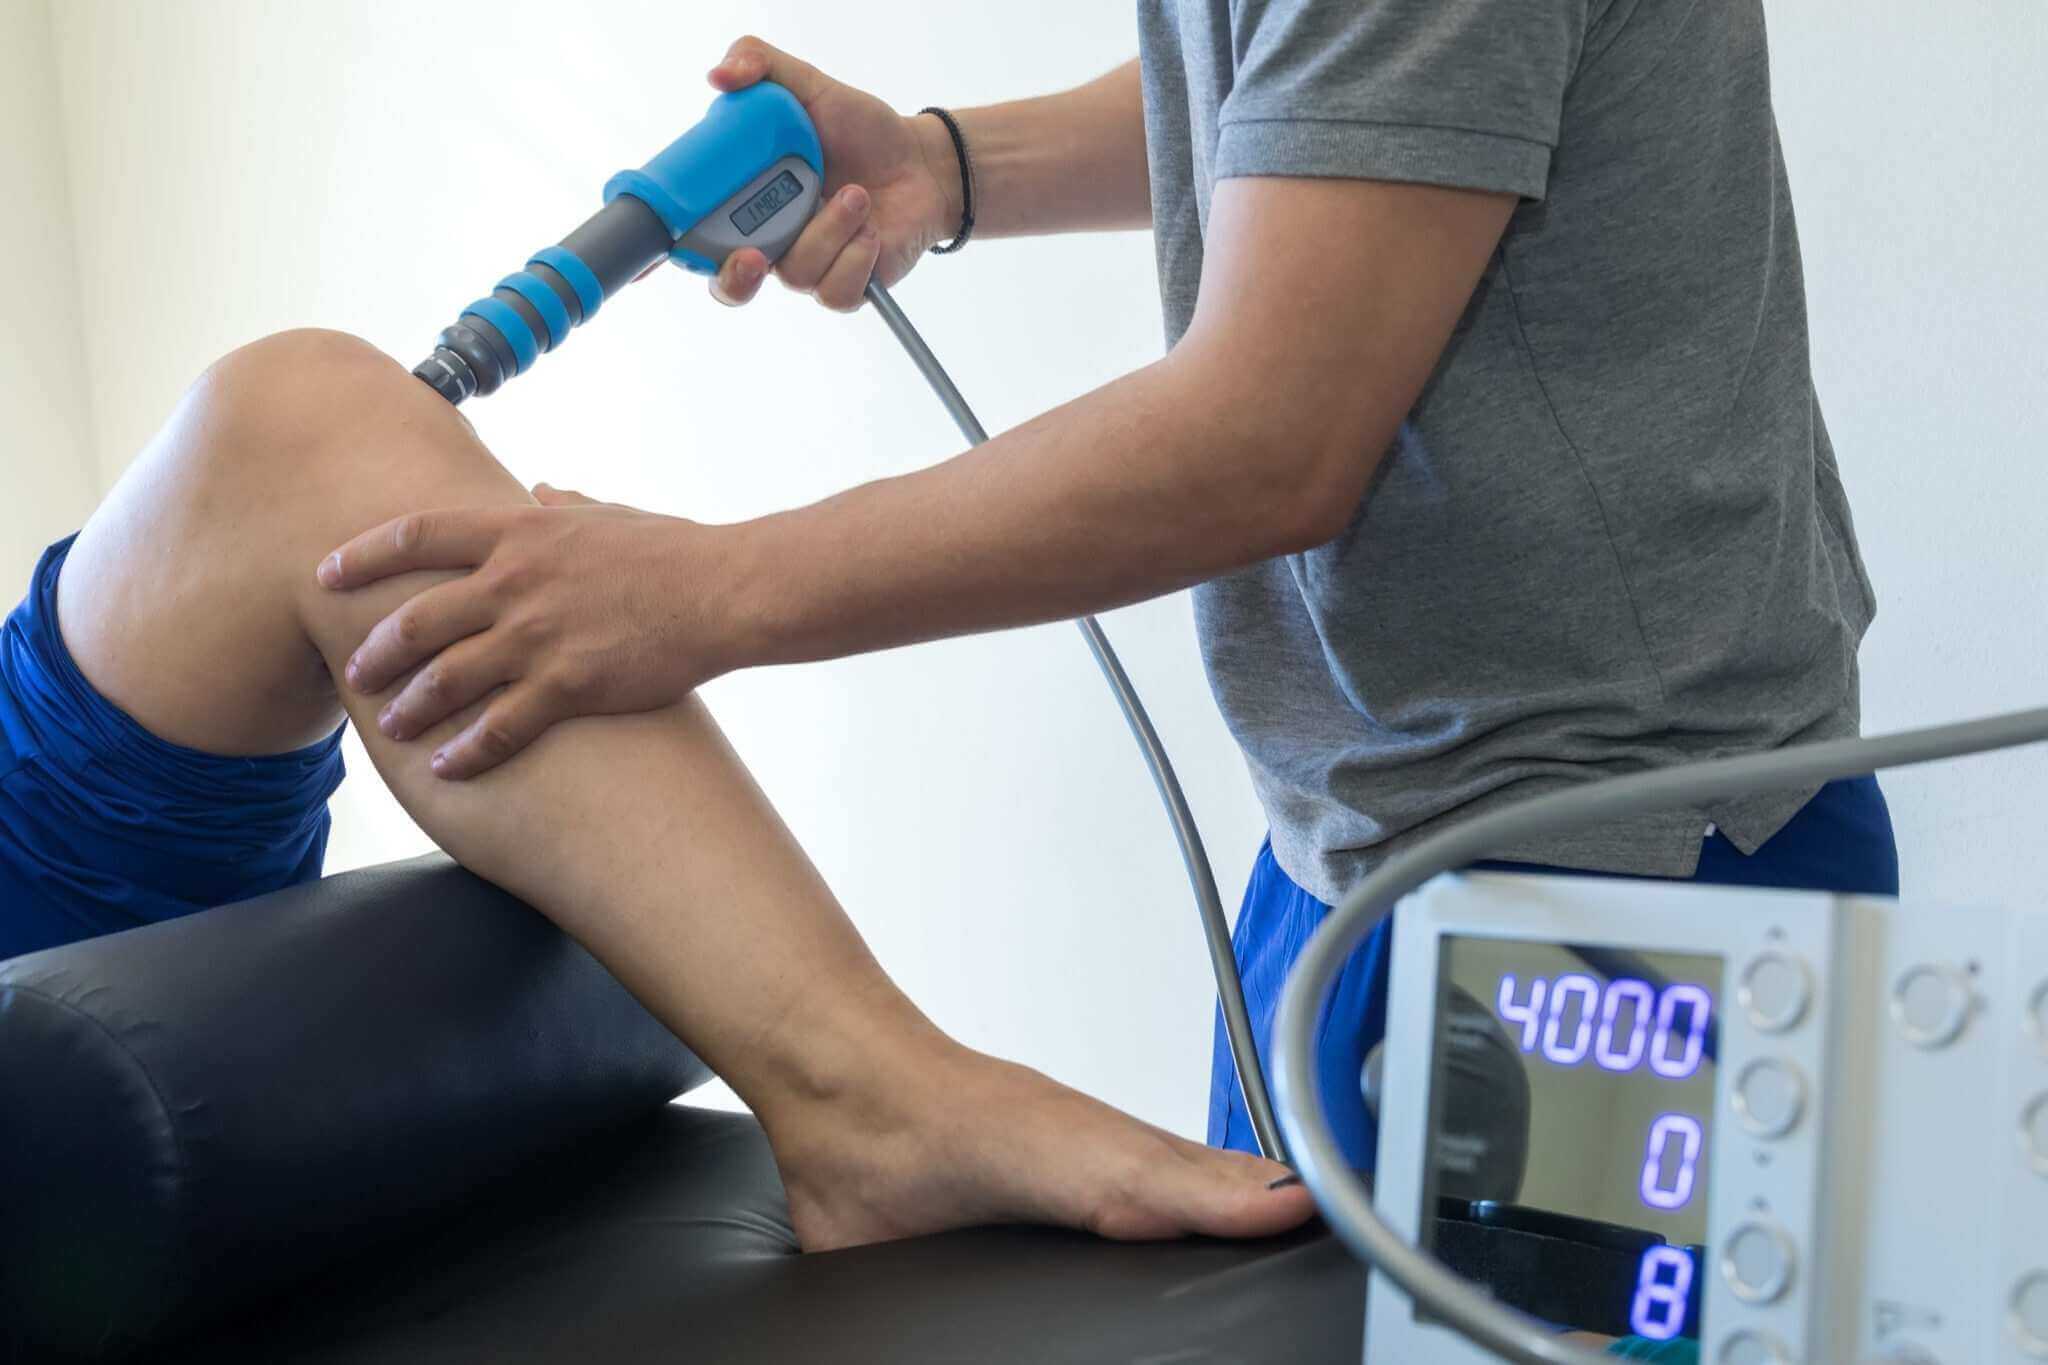 shock wave therapy